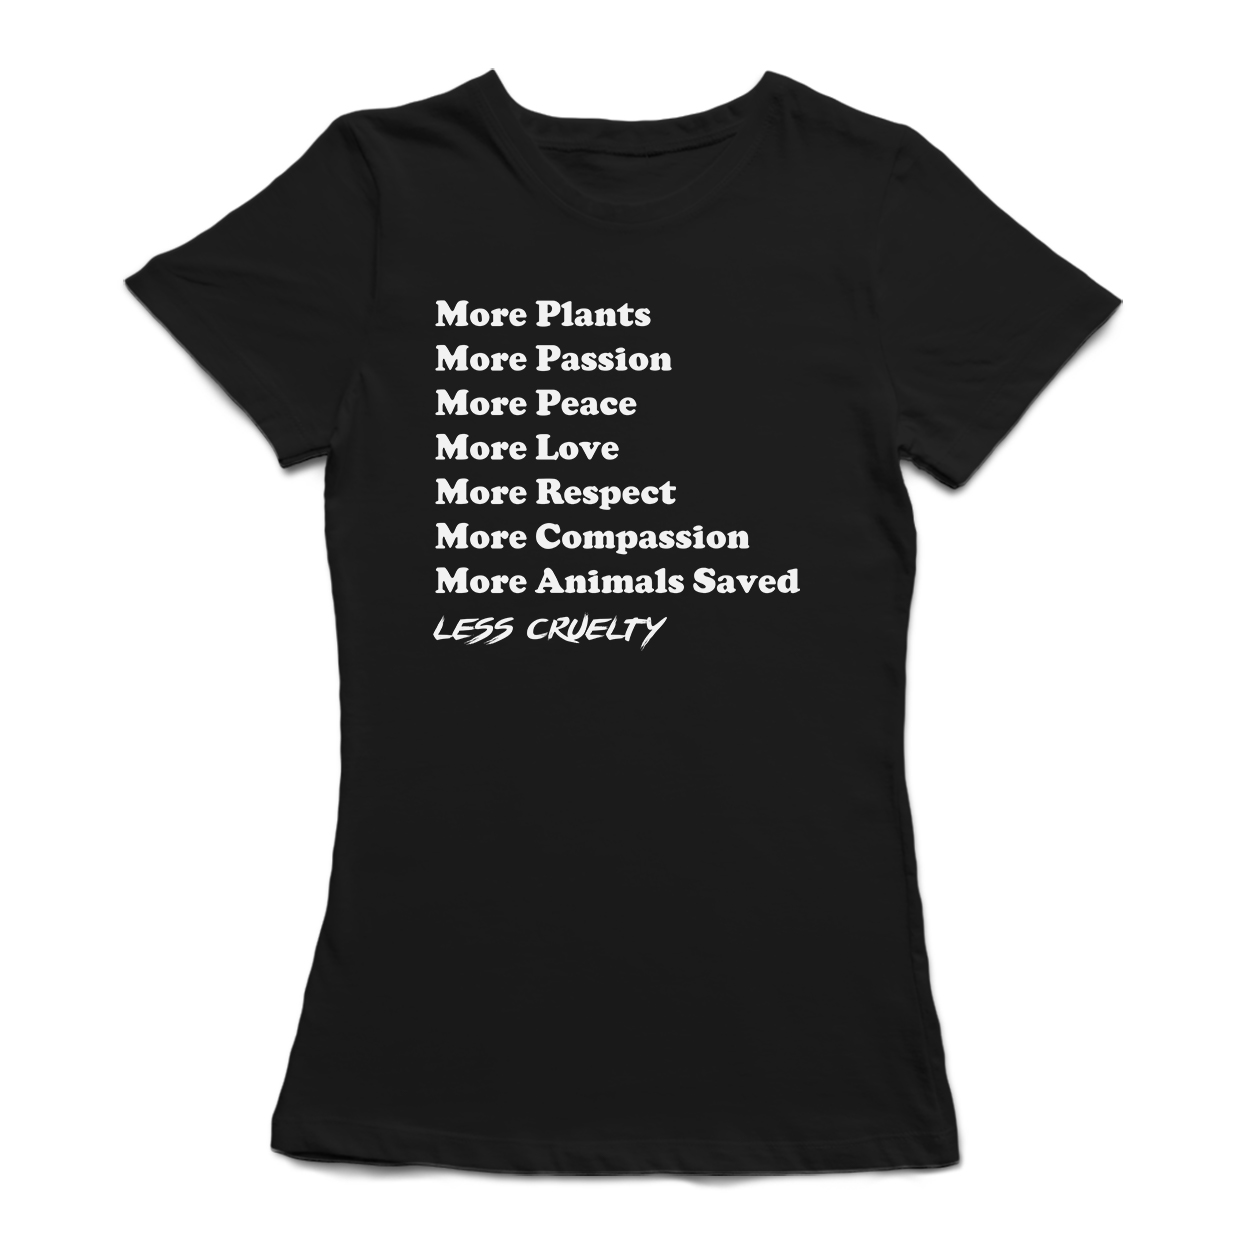 SmartPrints Graphic Streetwear "More Plants, Peace, Love, Animals Saved. Less Cruelty" Quote Women's T-shirt